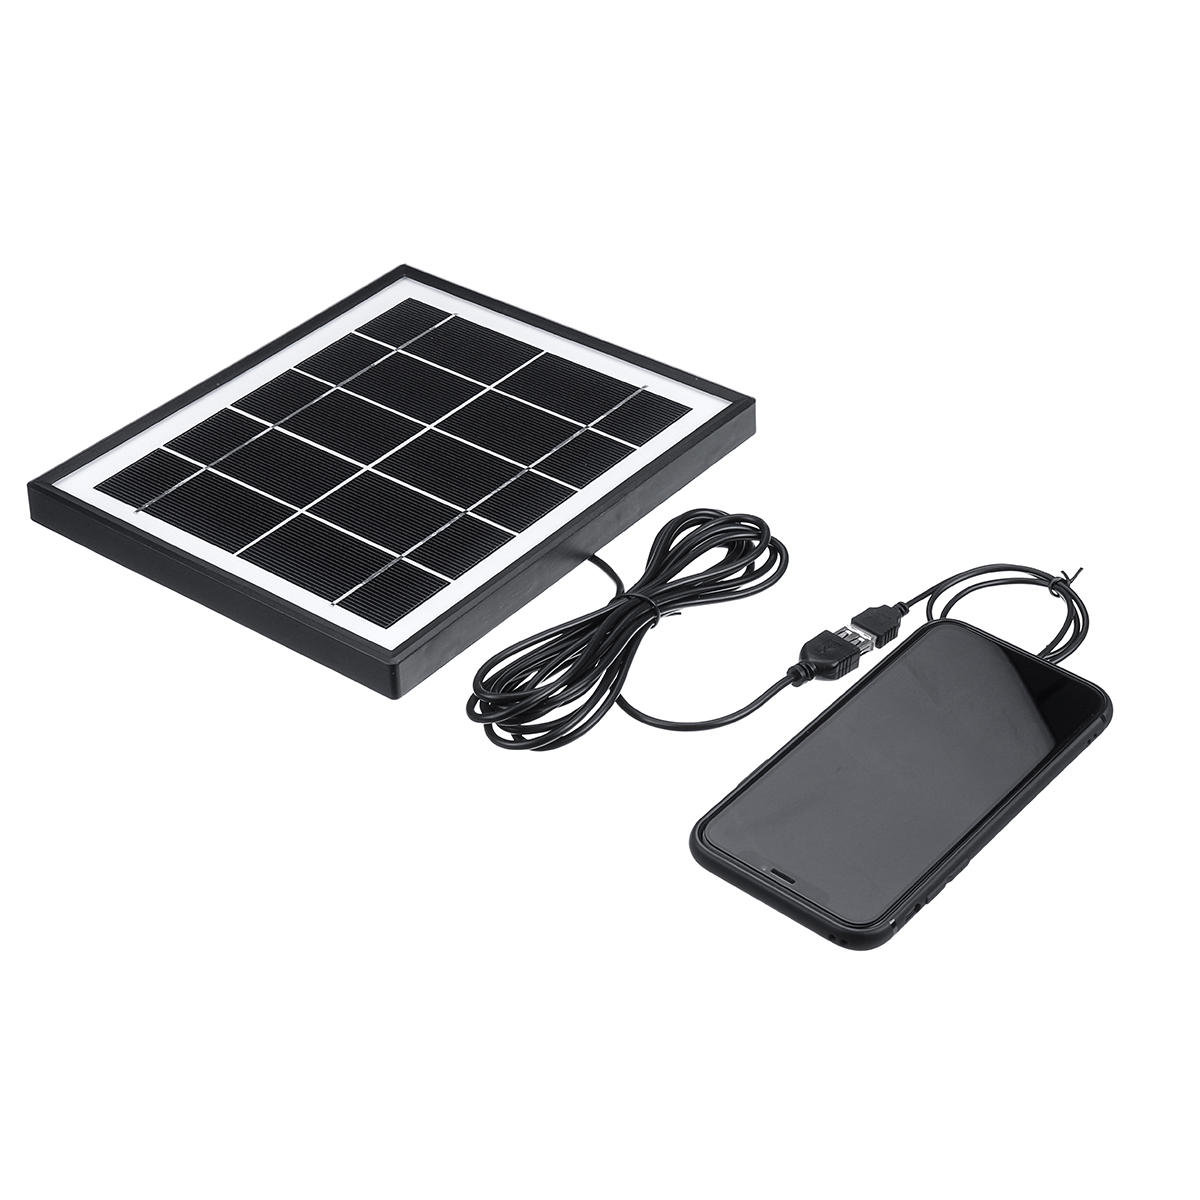 5V 5.5W Monocrystalline Silicon Solar Panel Charging Board with USB Interface + 3m Cable for Solar Systems/Monitoring/St